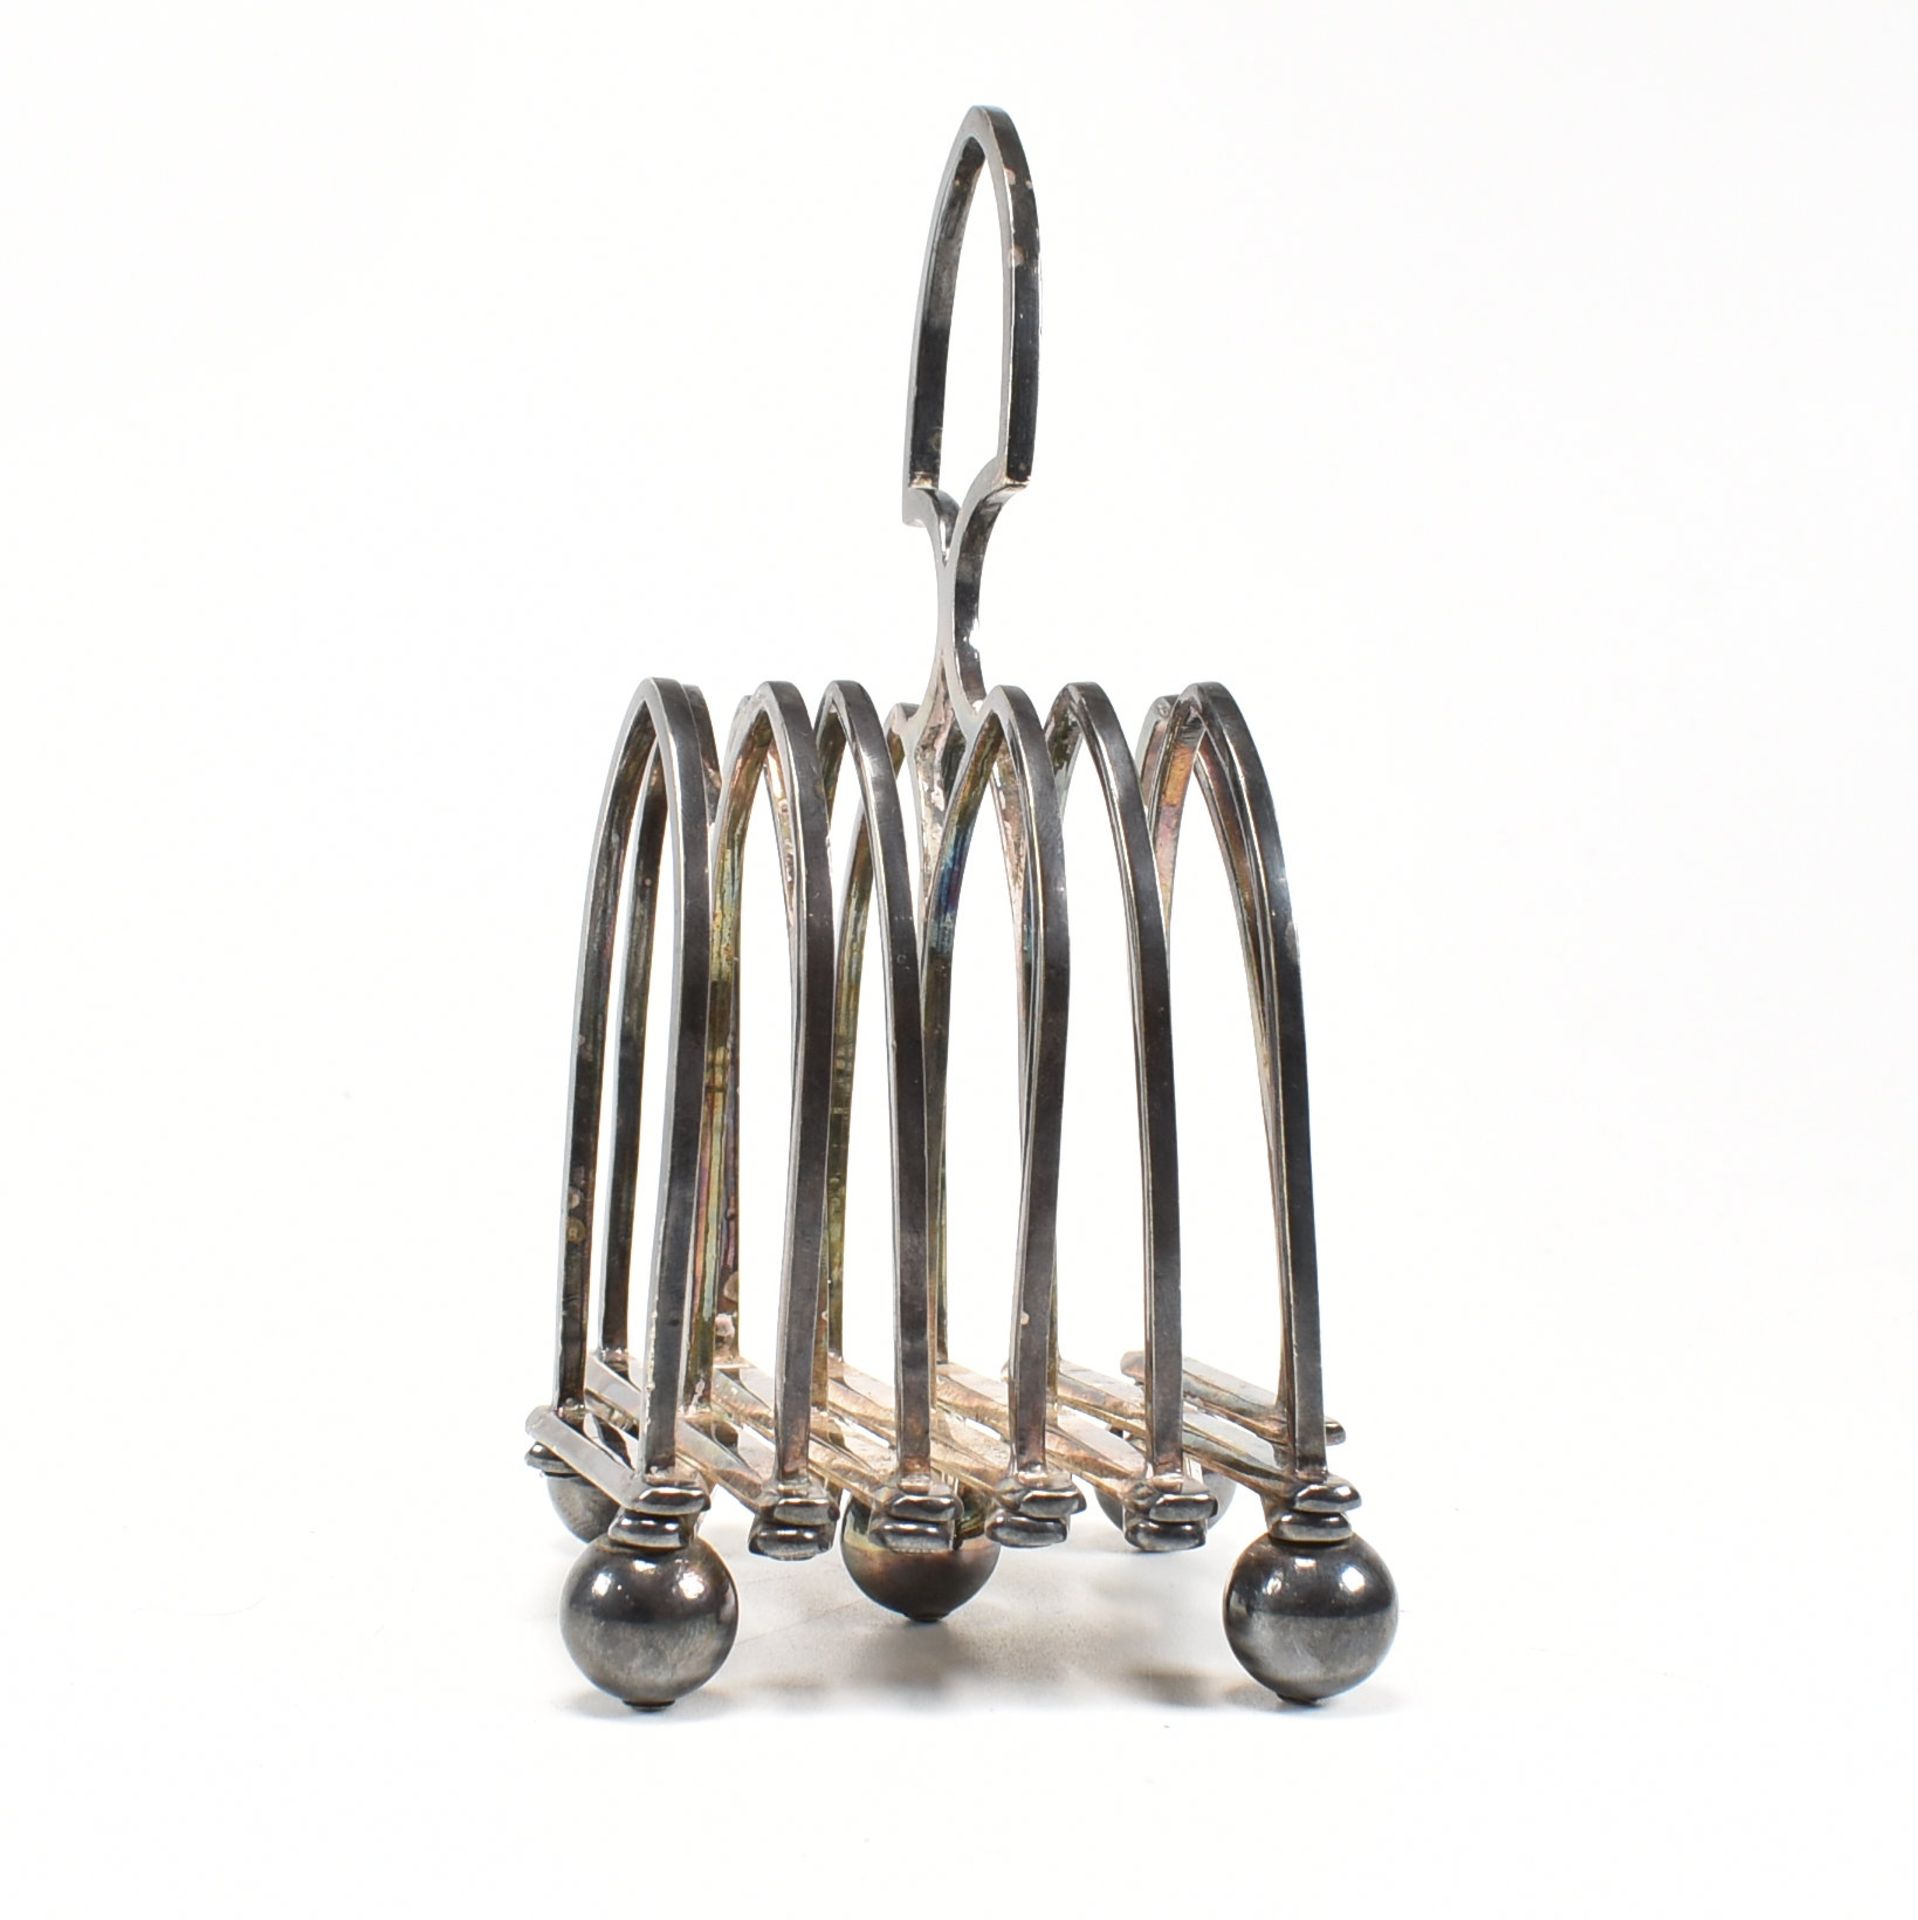 VICTORIAN MAPPIN & WEBB PRINCES PLATE CONCERTINA TOAST RACK - Image 2 of 9